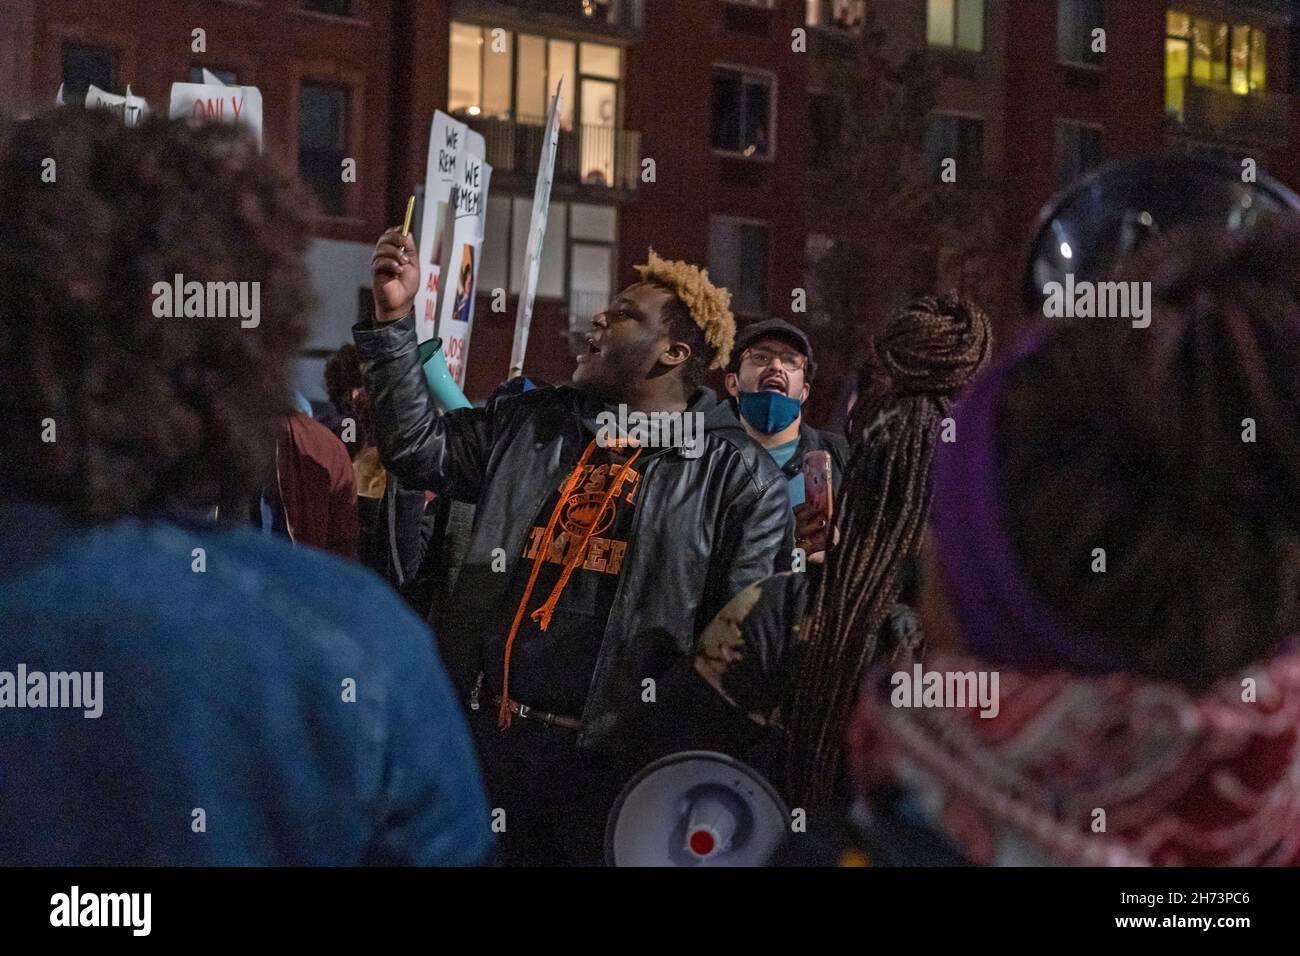 A protester streams during a protest march in Brooklyn against the acquittal of Kyle Rittenhouse in New York City.Hundreds march through Brooklyn to protest Rittenhouse verdict and calling his acquittal a double standard and a failure of the justice system. Kyle Rittenhouse (18) faced homicide charges and other offenses in the fatal shootings of Joseph Rosenbaum and Anthony Huber and for shooting and wounding of Gaige Grosskreutz during unrest in Kenosha that followed the police shooting of Jacob Blake in August 2020. (Photo by Ron Adar / SOPA Images/Sipa USA) Stock Photo